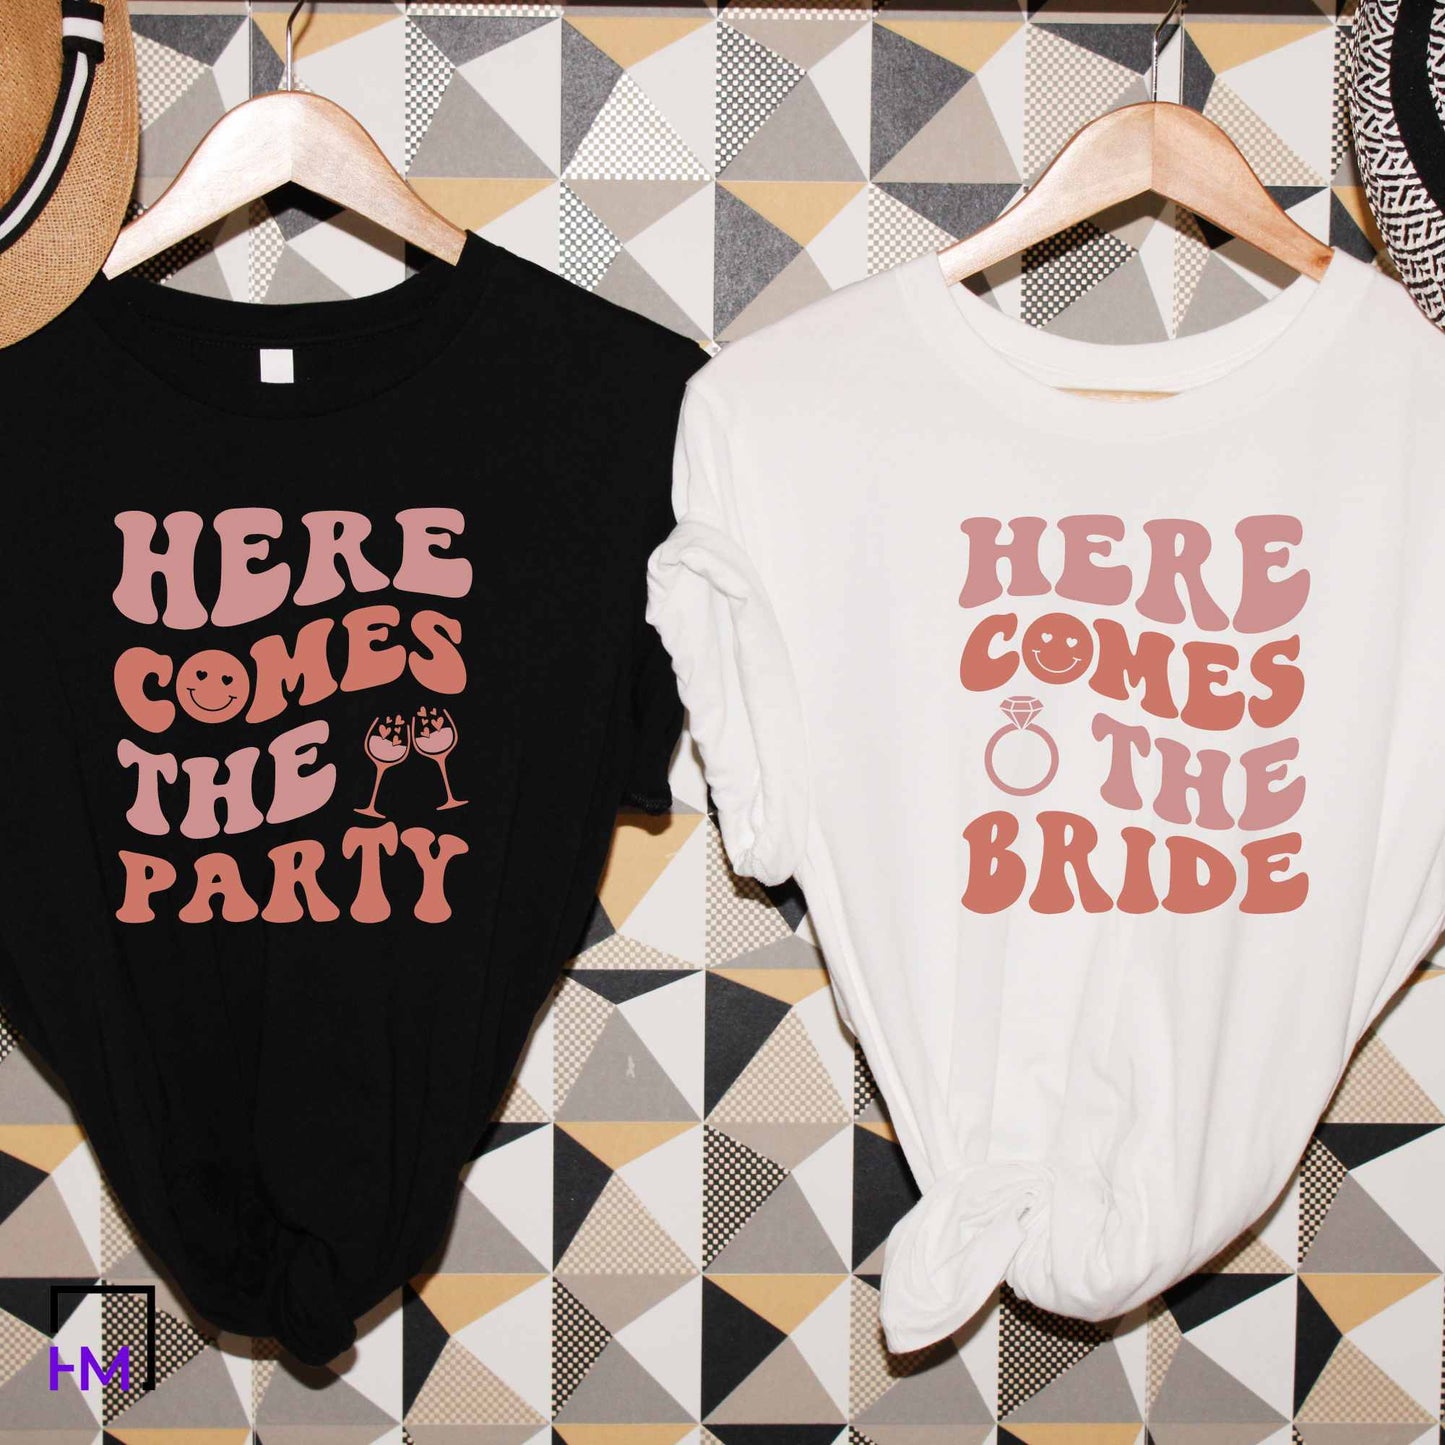 Here Comes the Bride, Here Comes the Party Shirts, Funny Bachelorette Party Shirts